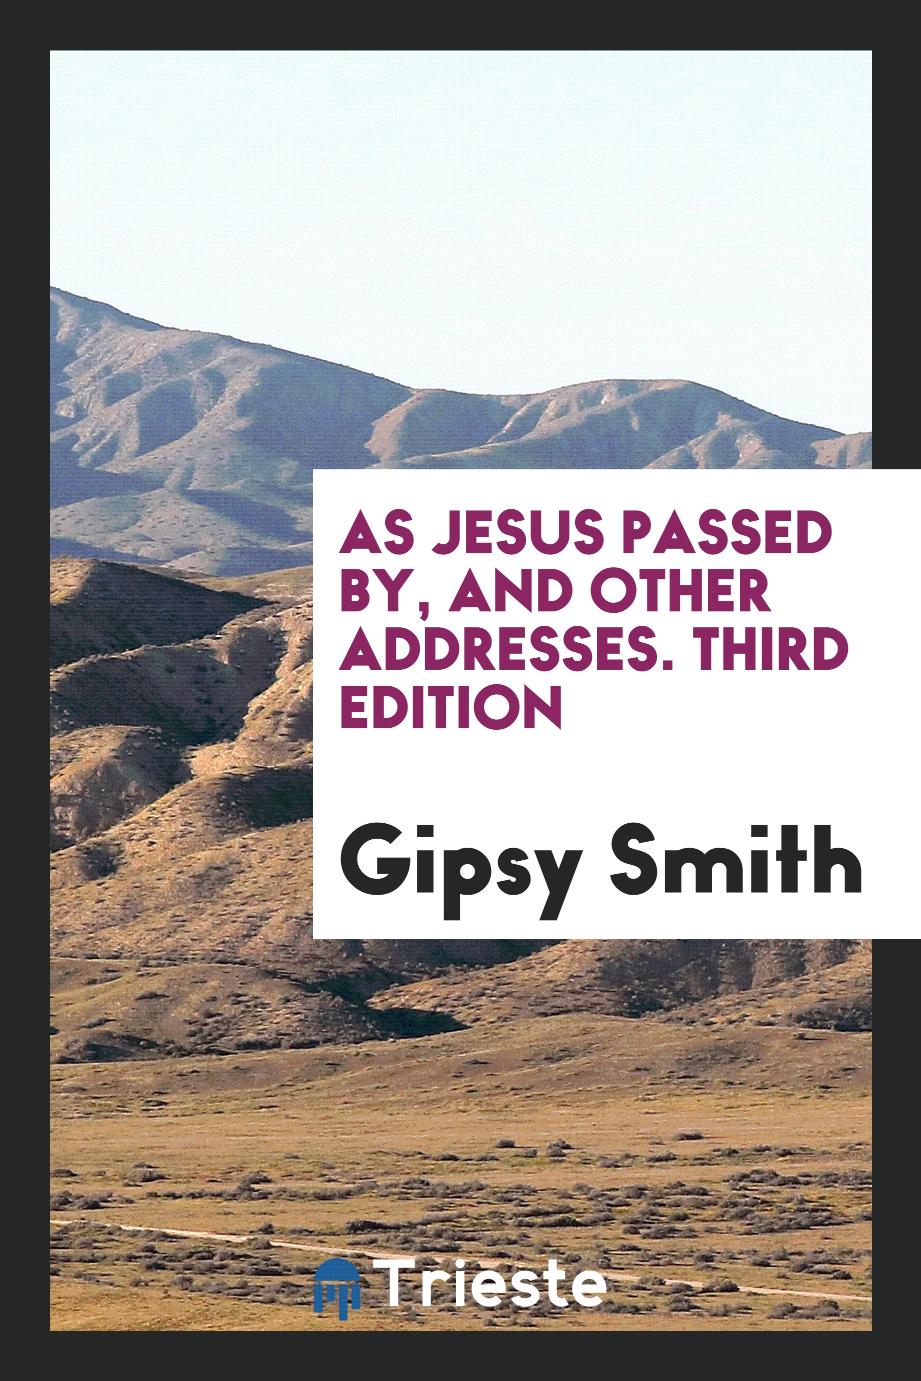 As Jesus Passed by, and Other Addresses. Third Edition